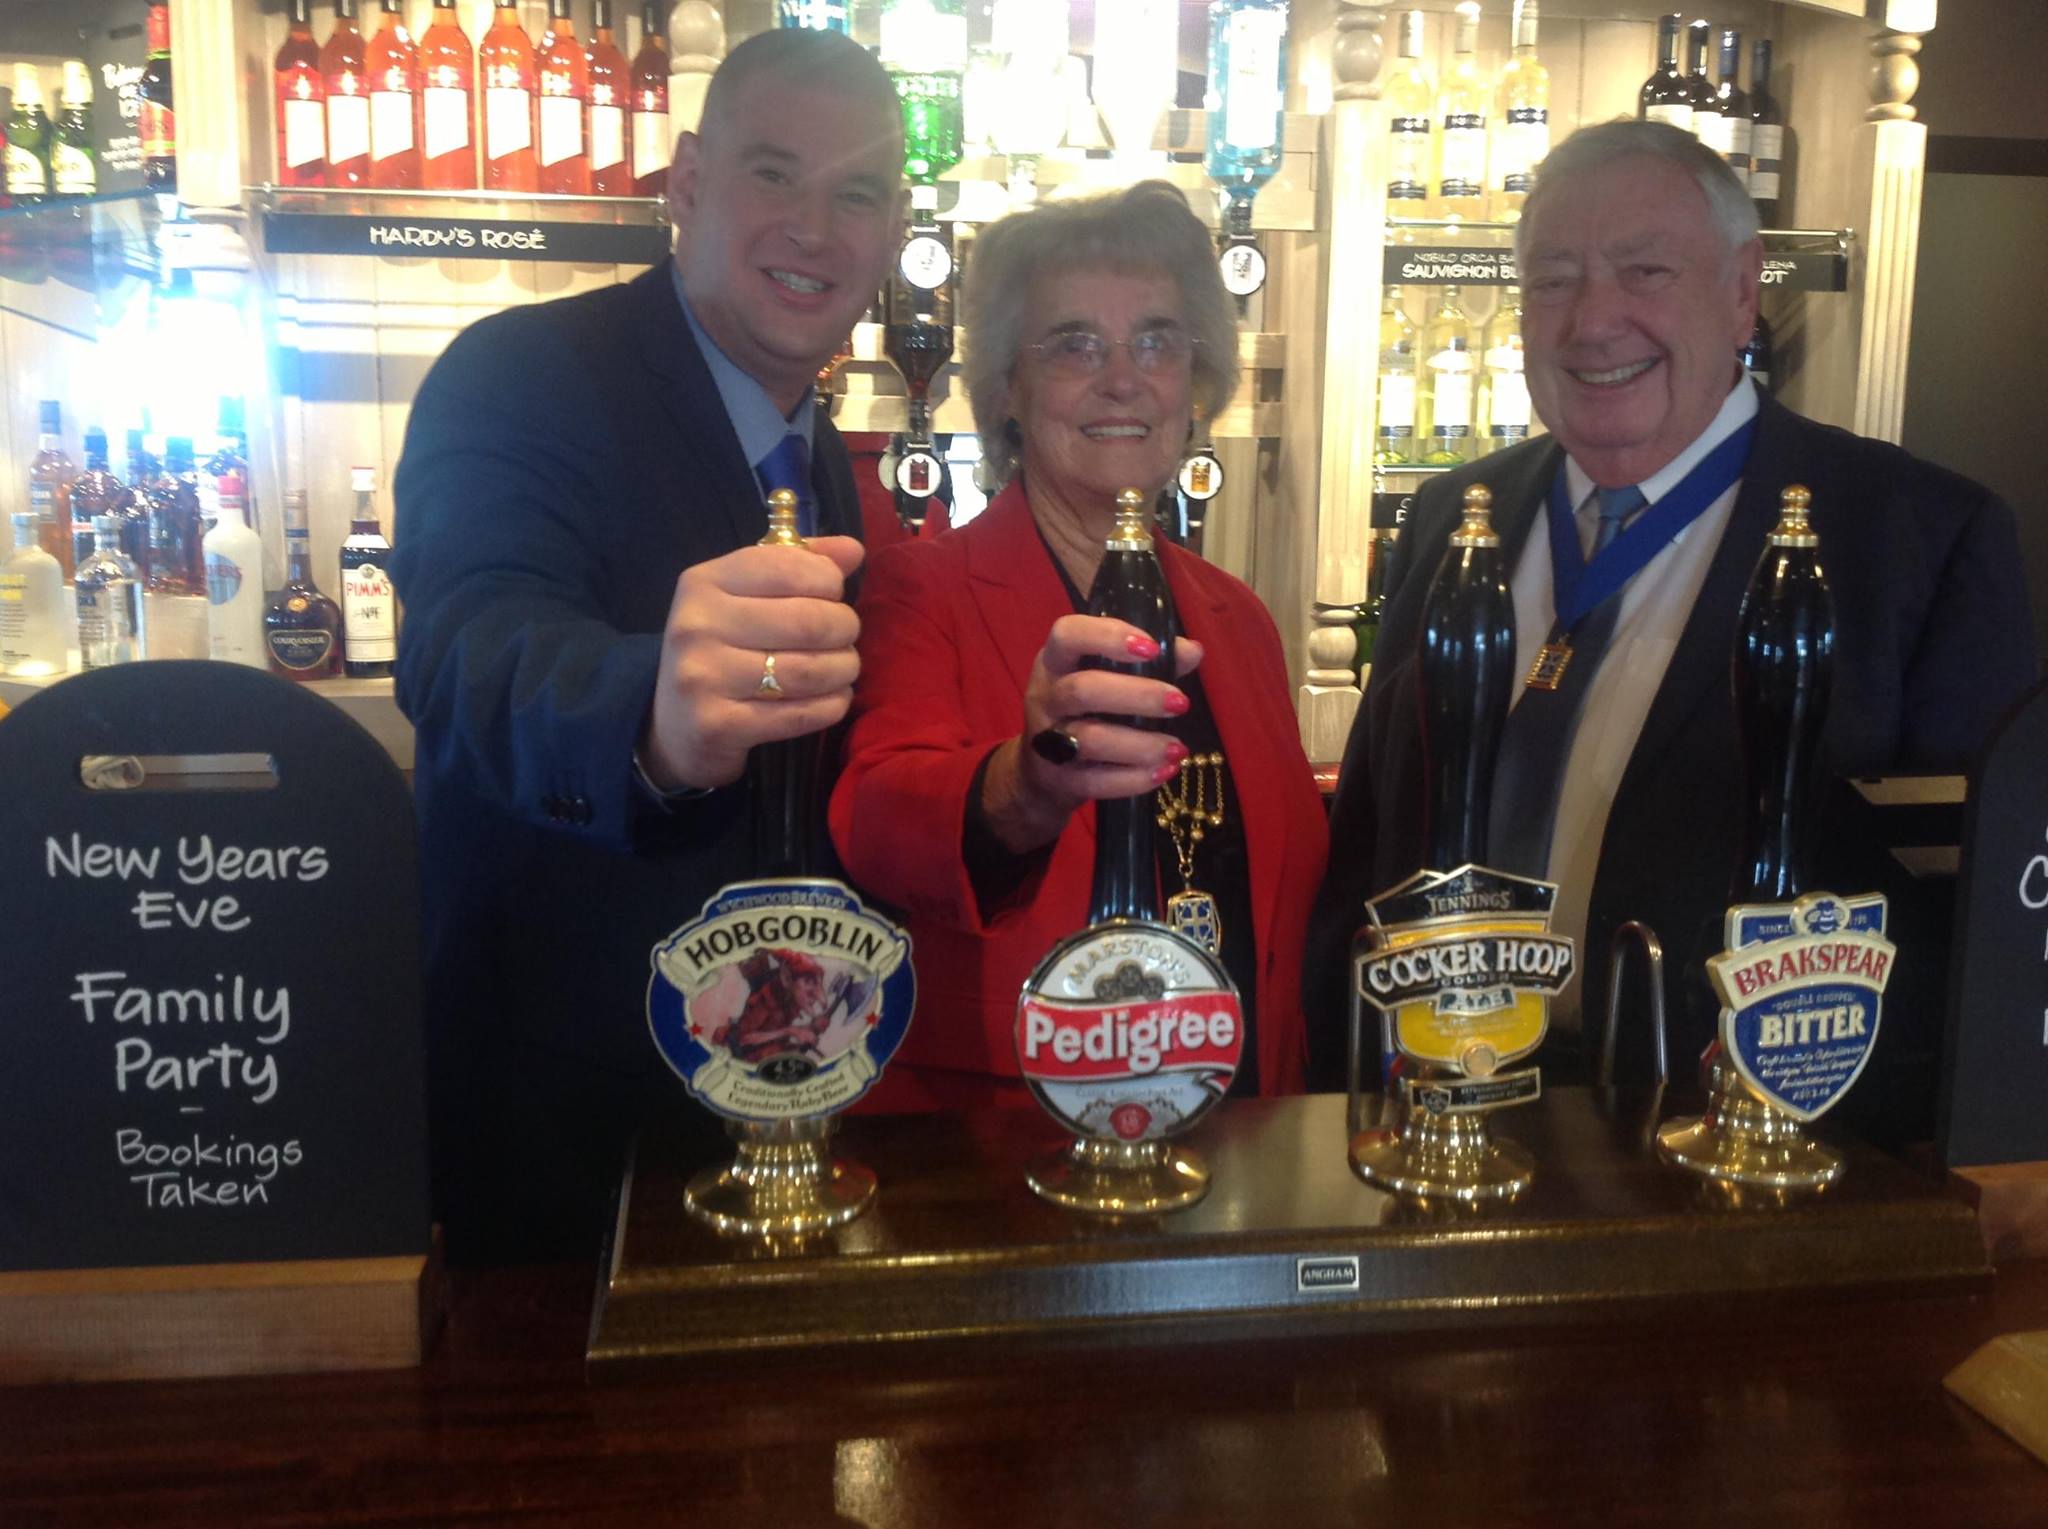 The Guelder Rose pub in Southport was officially opened on 14th October 2013 by Mayor of Sefton, Cllr Maureen Fearn, and consort Frank Winrow